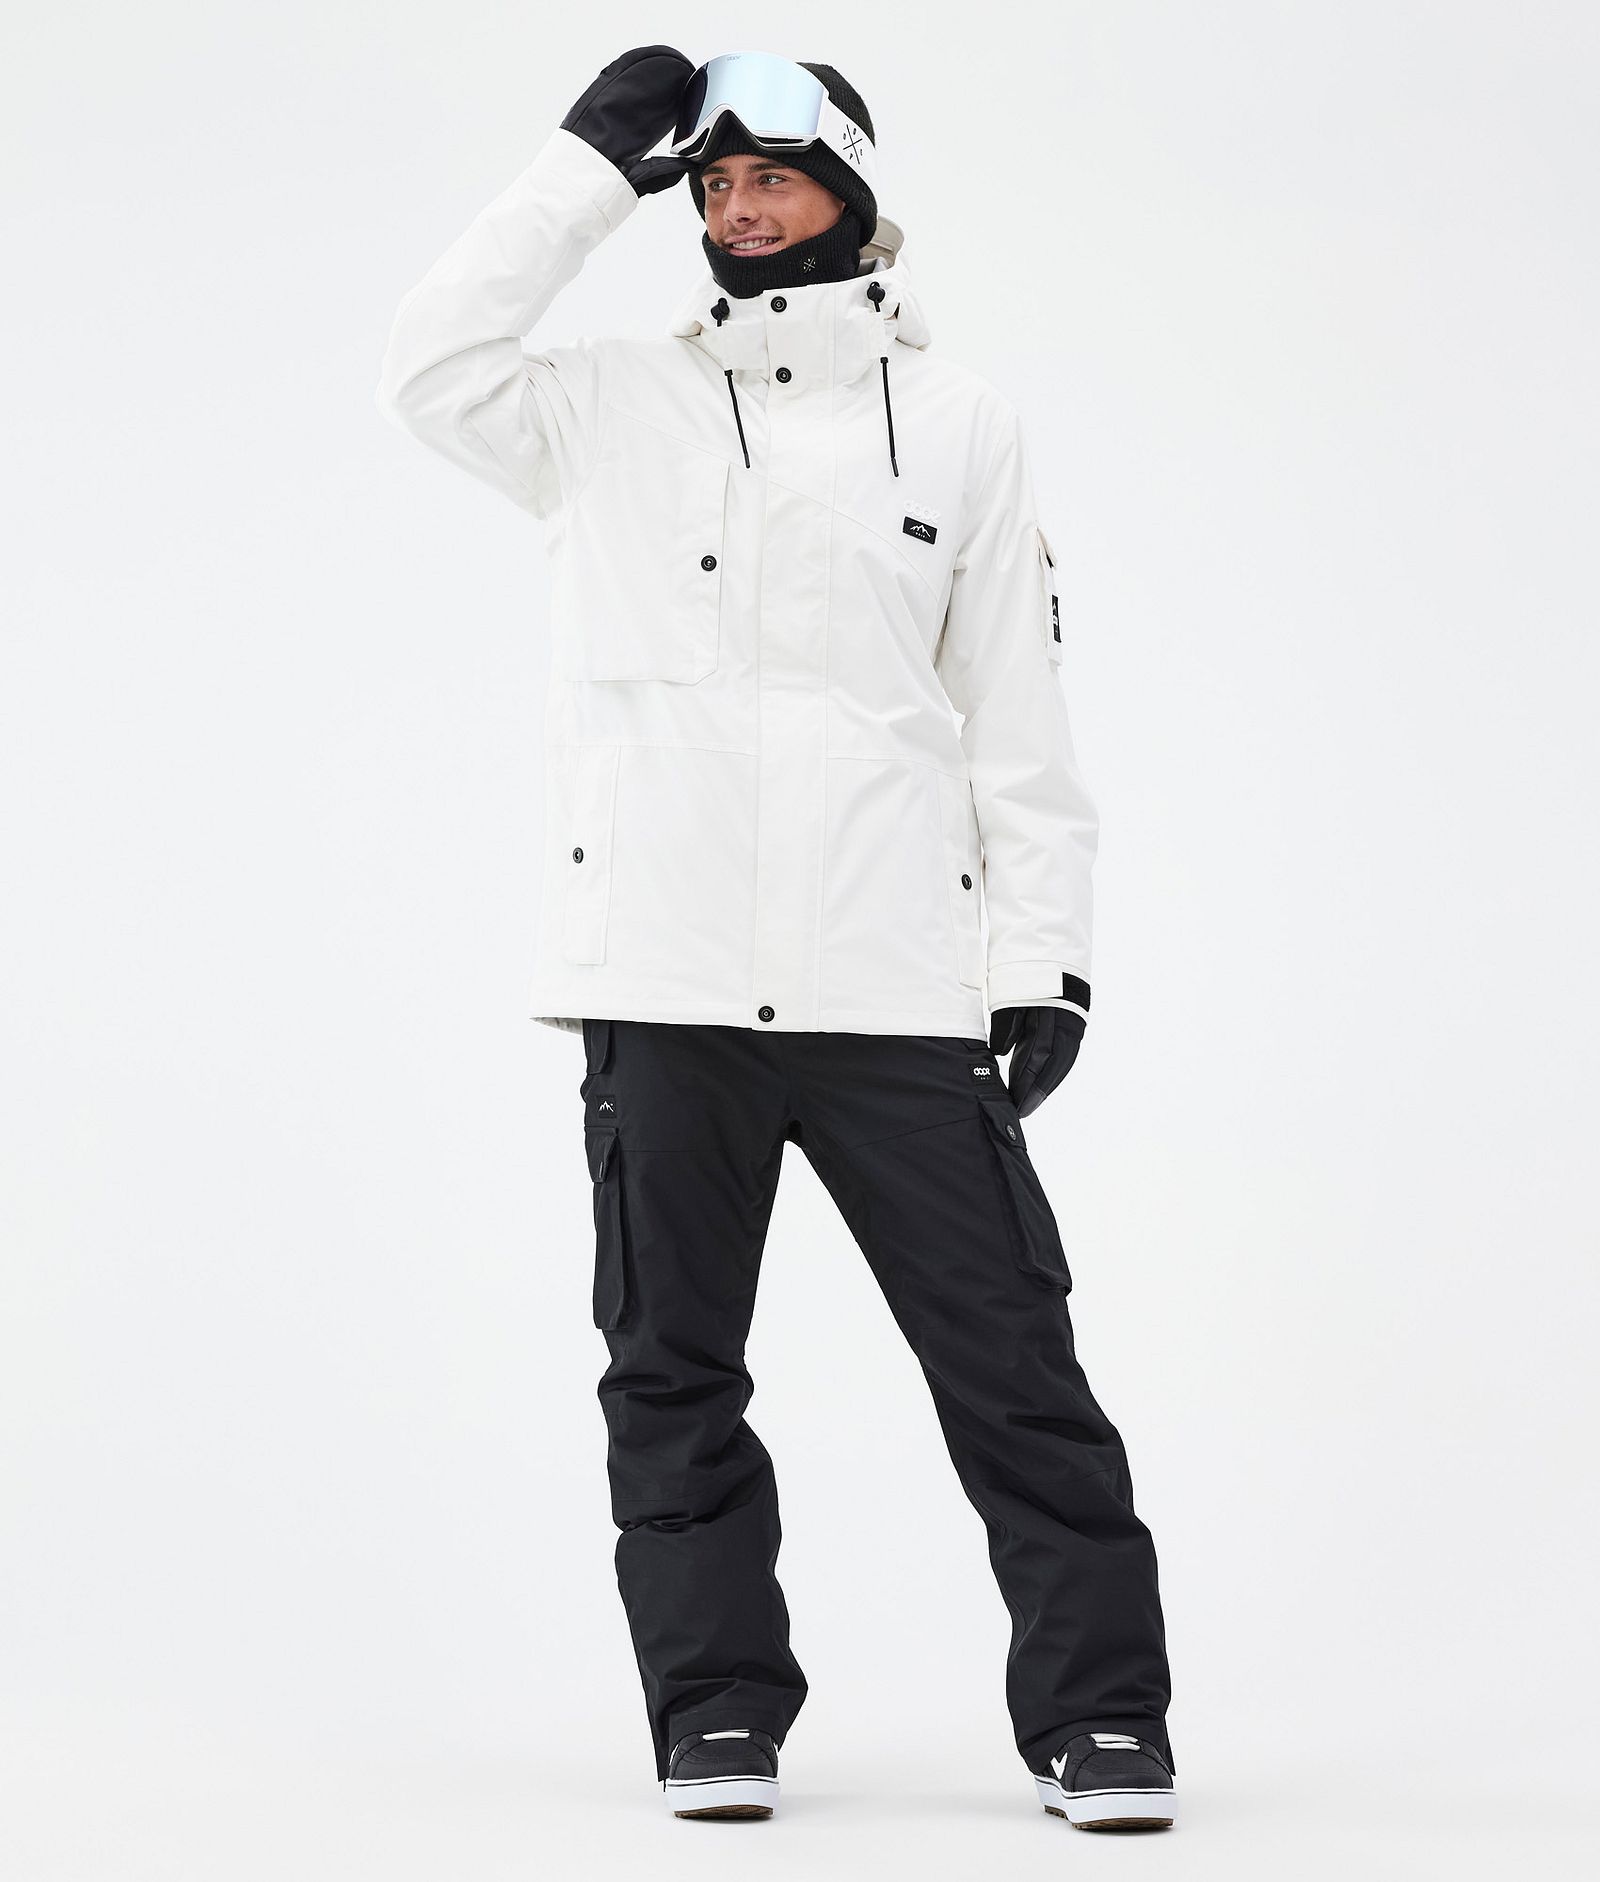 Dope Adept Outfit de Snowboard Hombre Old White/Blackout